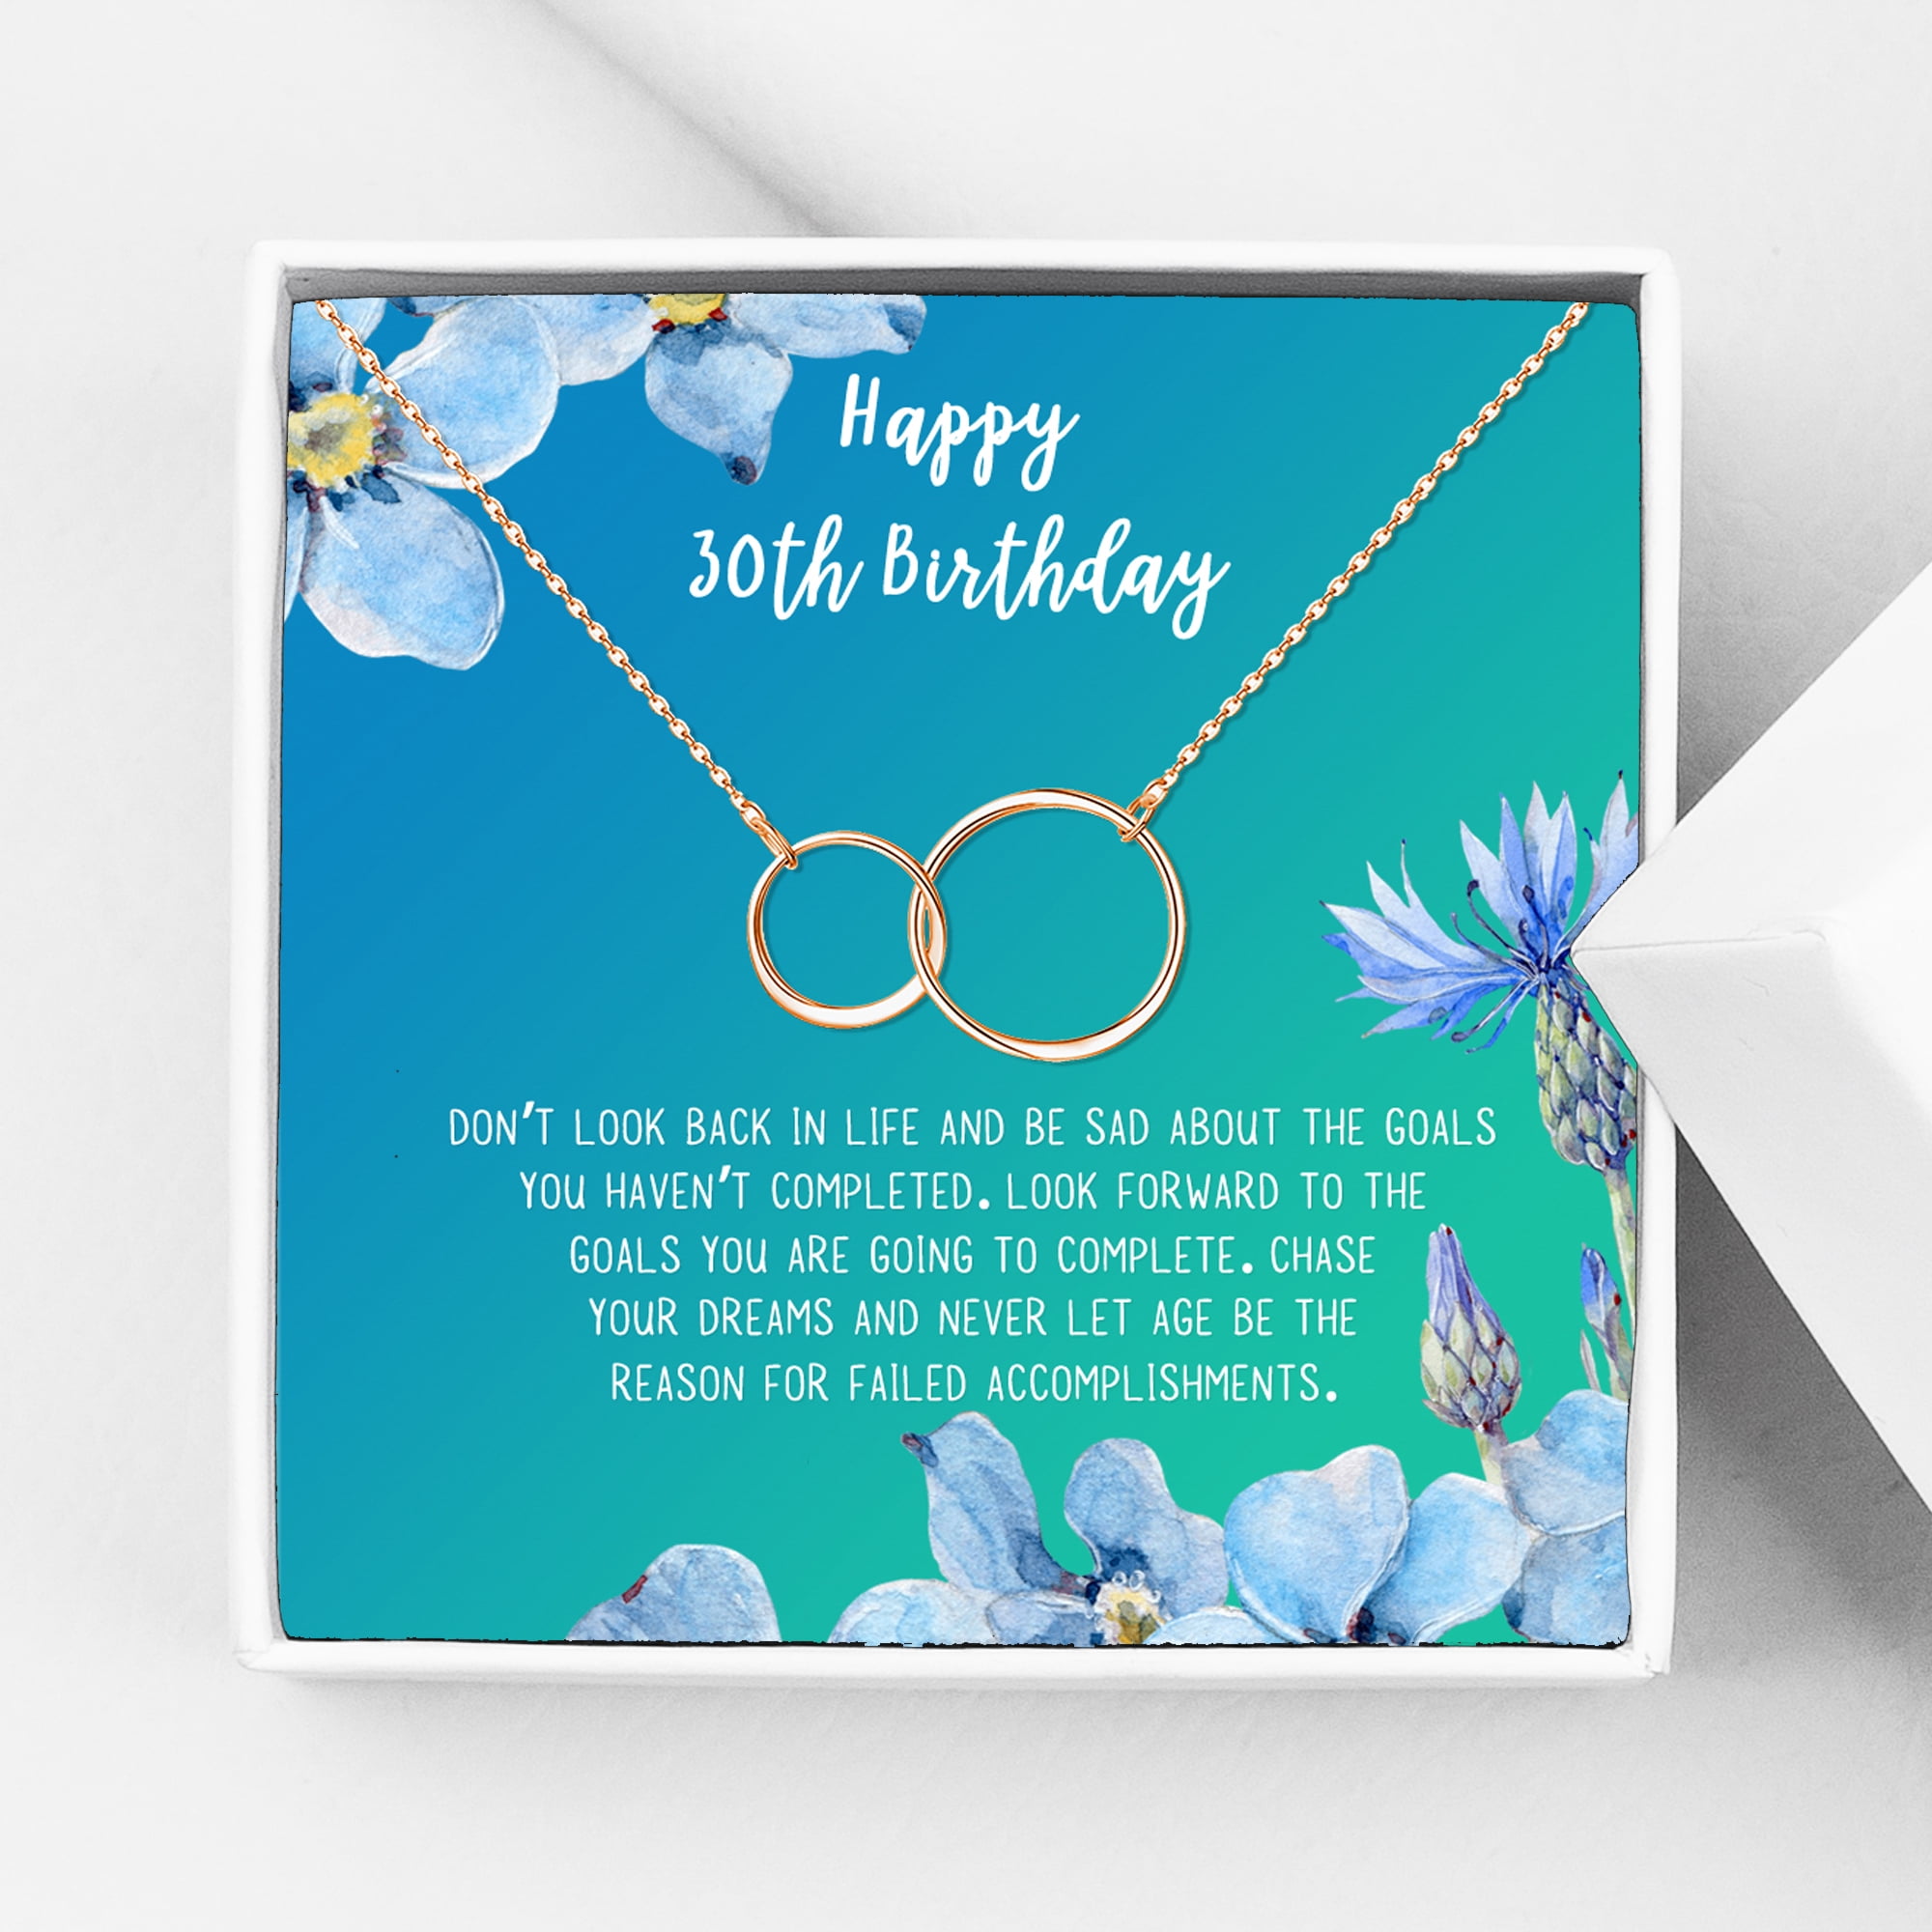 Friend Details about   Sparkly Personalised Baby Shower Card for the Mum to be Daughter Sister 